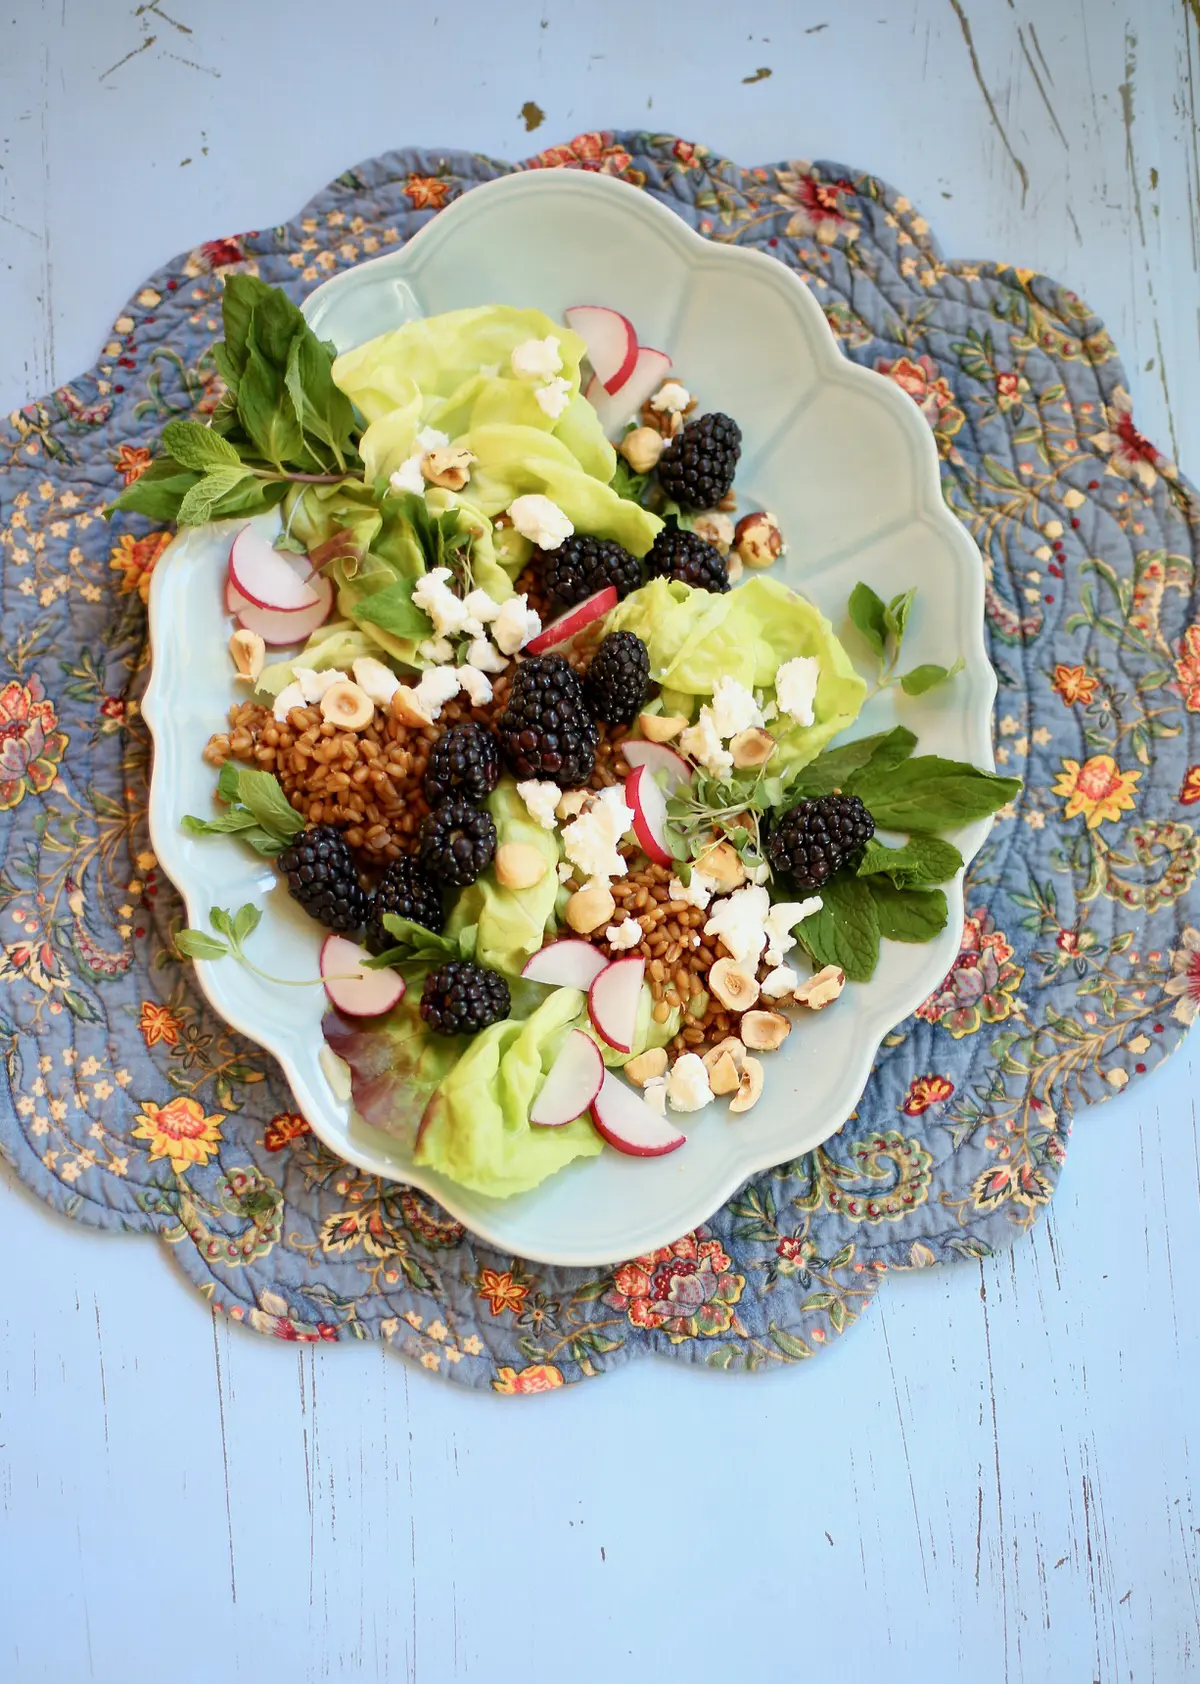 Long blue platter of salad made of goat cheese, blackberries, hazelnuts, radish and mint on a blue table 